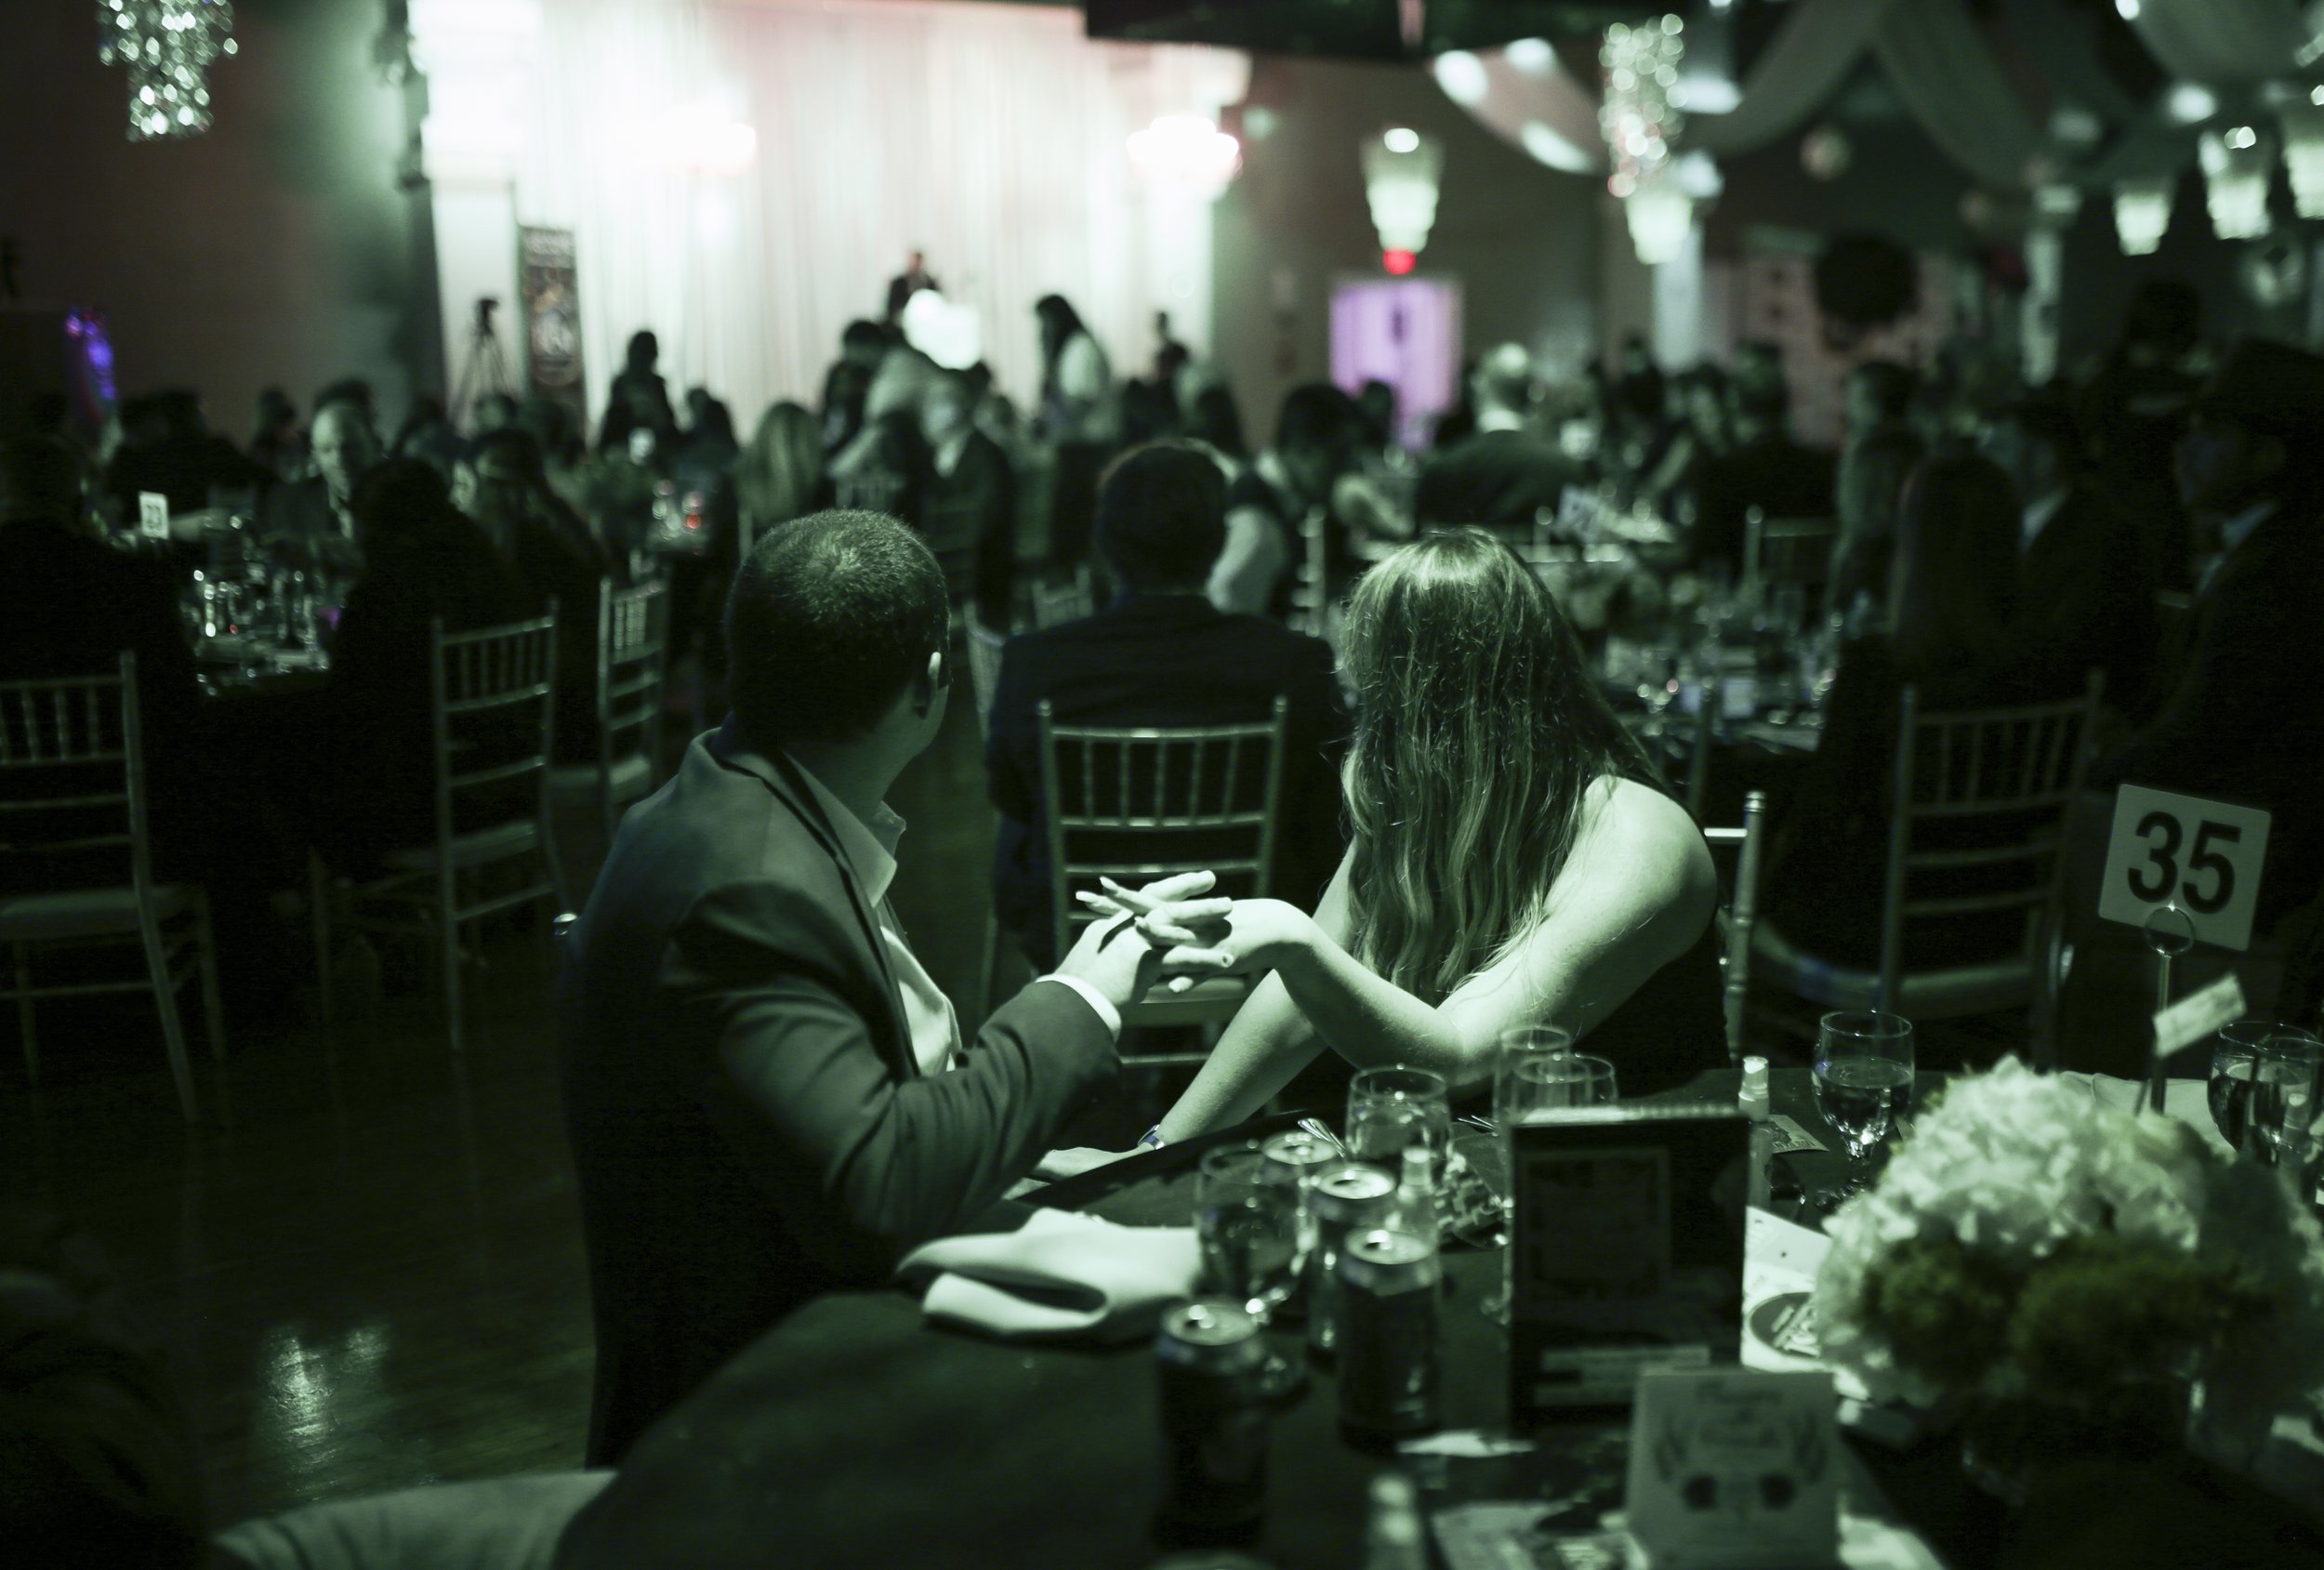  Attendees hold hands during the Best of Northwest Arkansas awards gala 